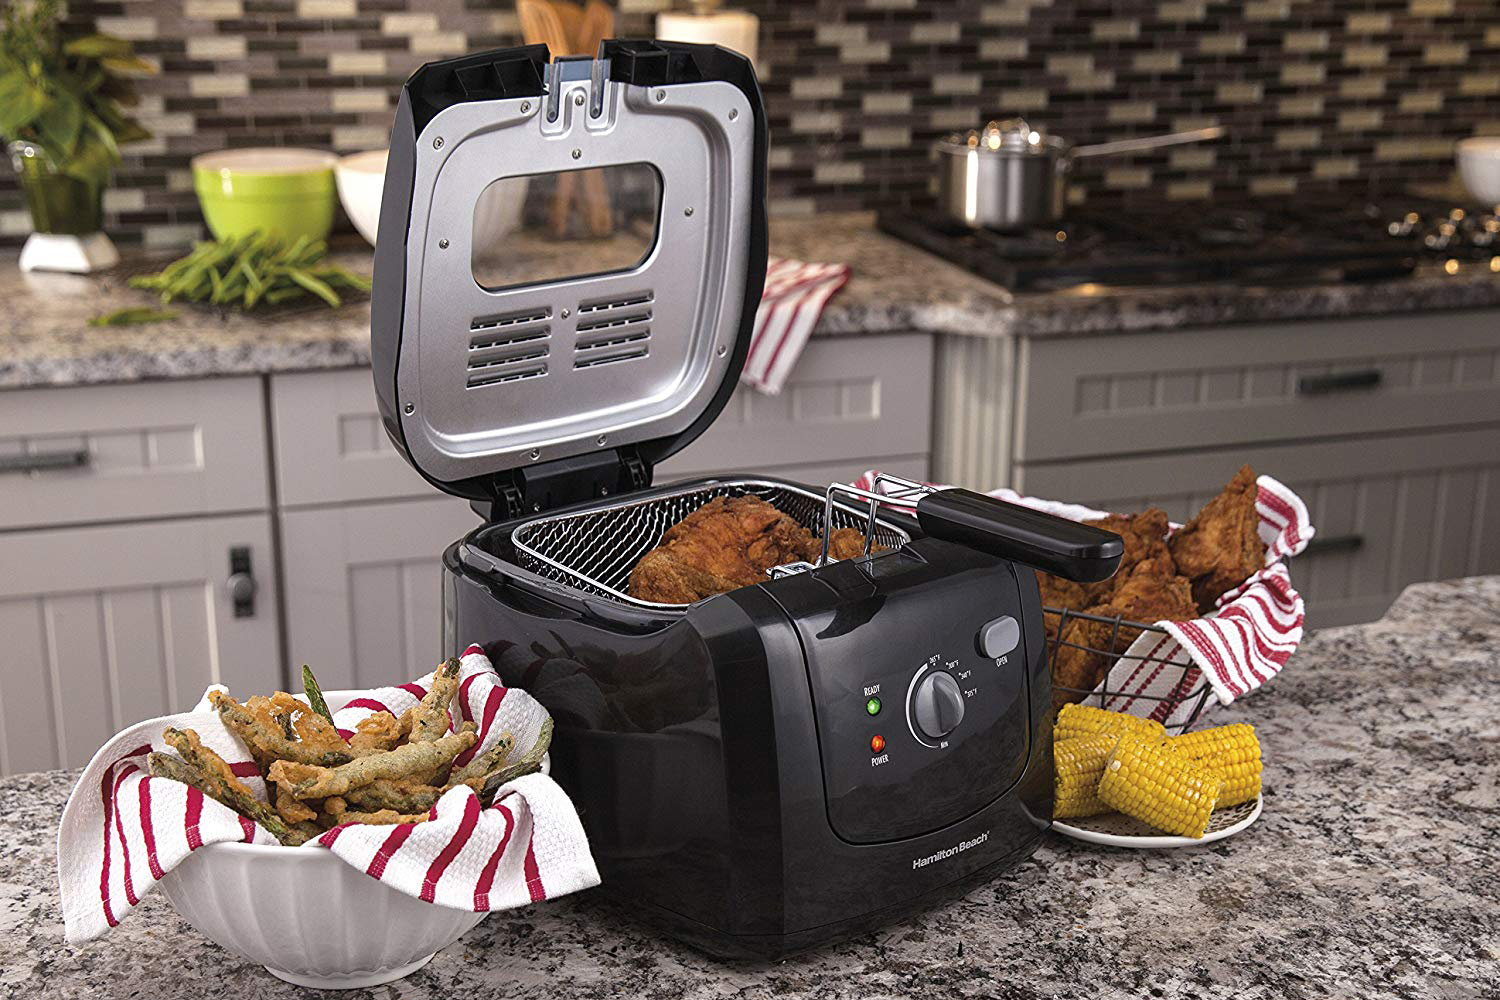 Hamilton Beach 2.5-Quart Sure-Crisp Air Fry Toaster Oven in Stainless Steel